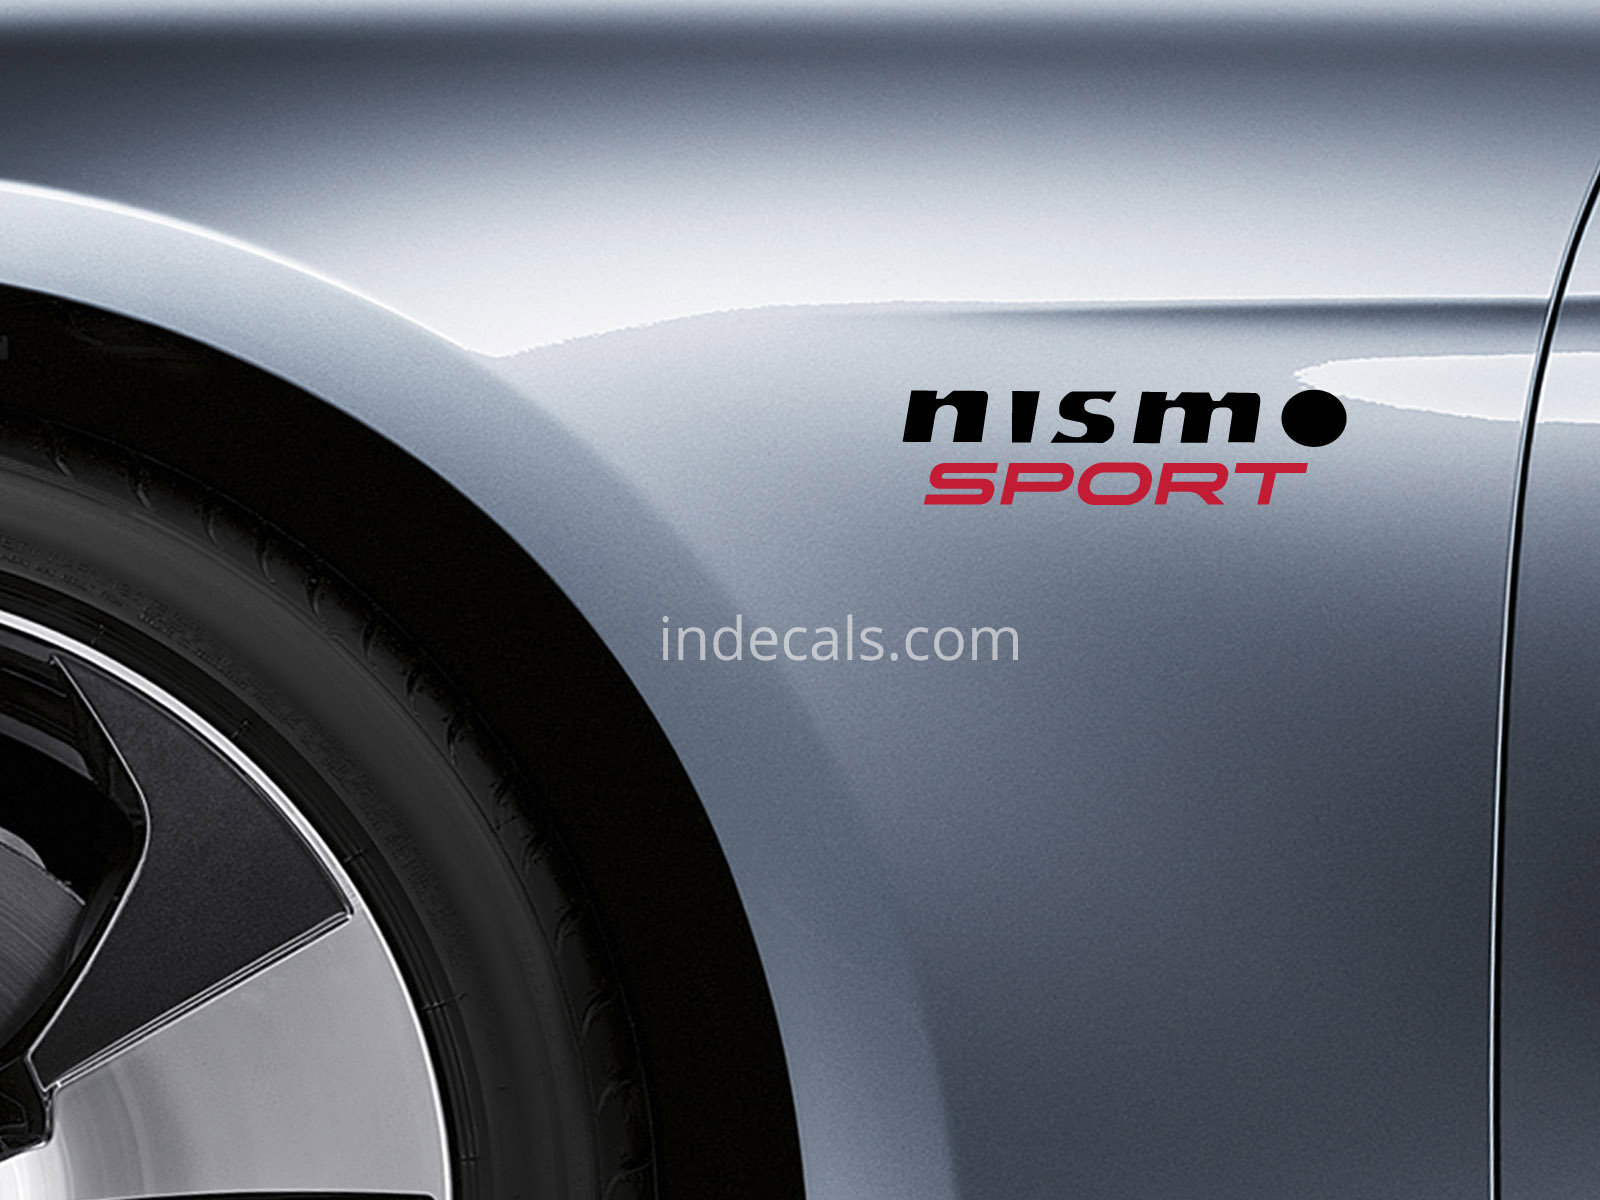 2 x Nismo Sports stickers for Wings - Black & Red